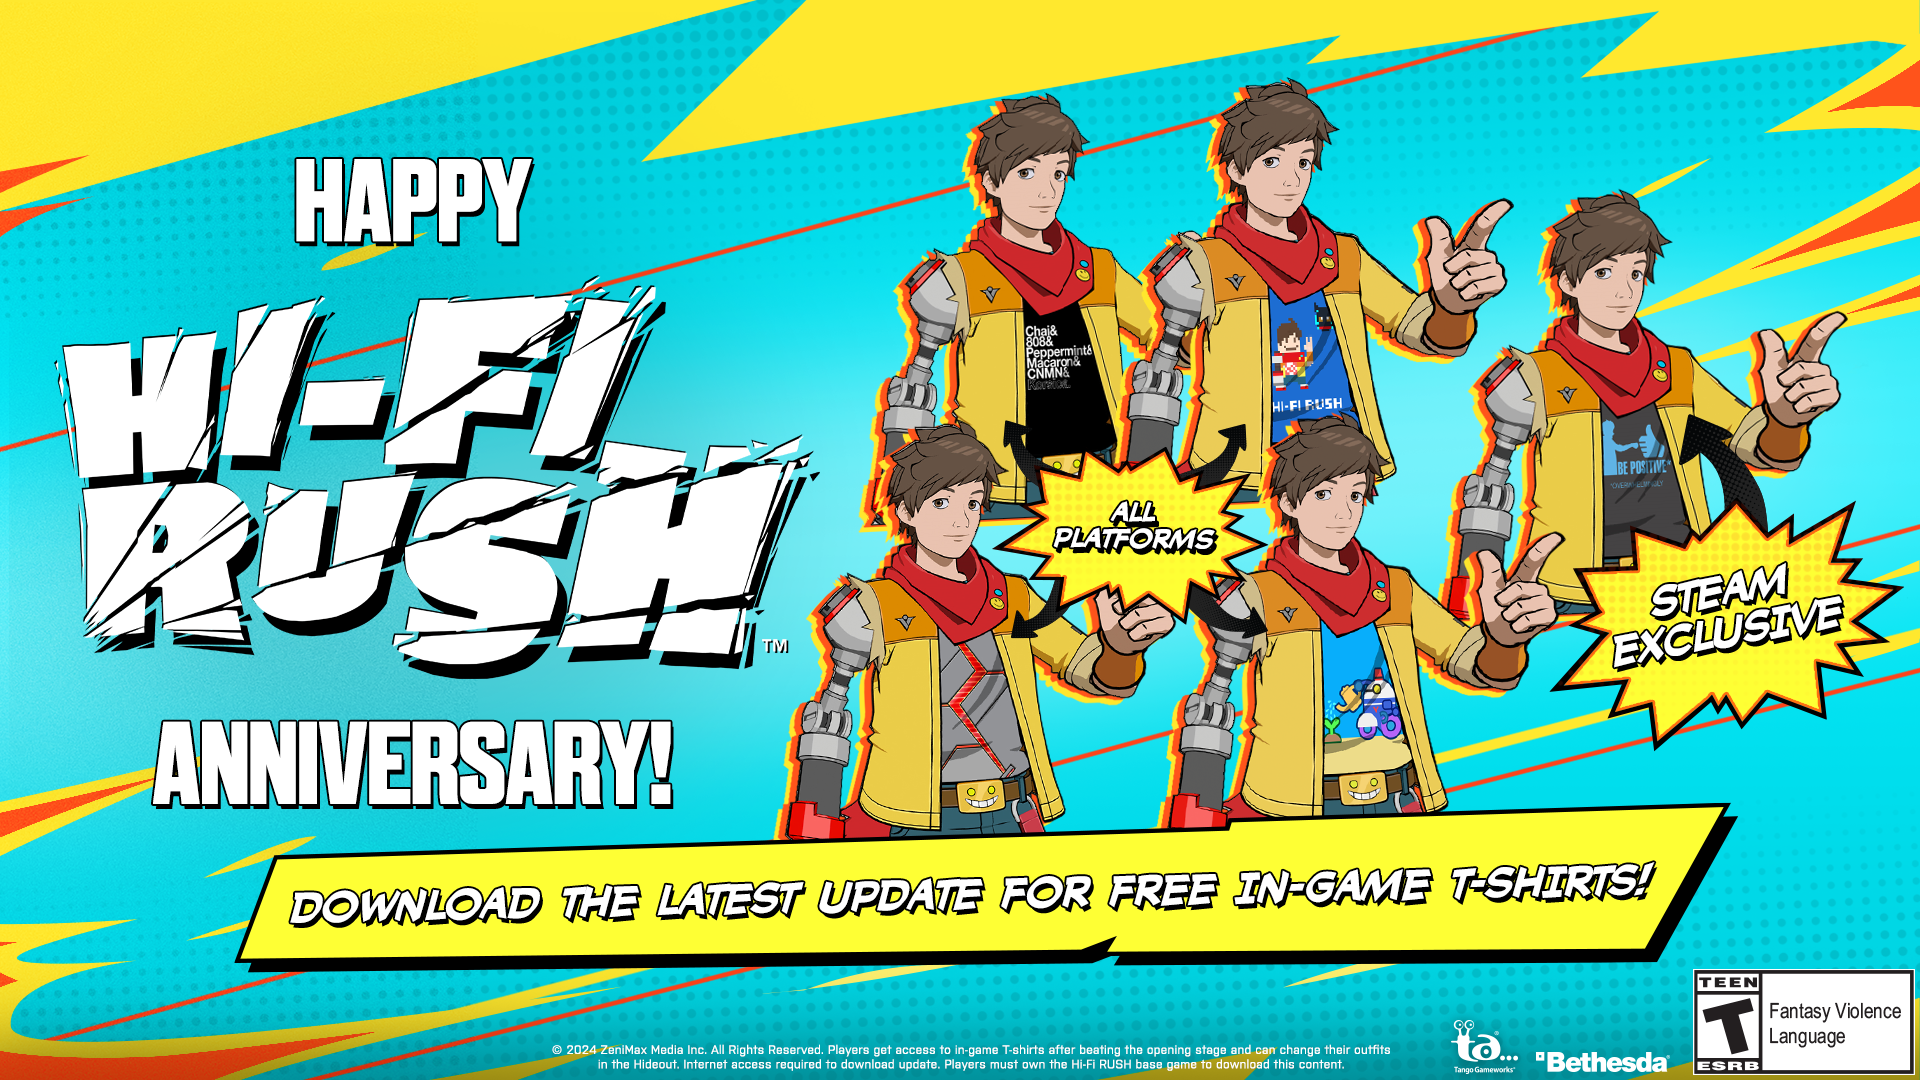 Hi-Fi Rush Launches First Anniversary Update Featuring New Shirts and Bug Fixes